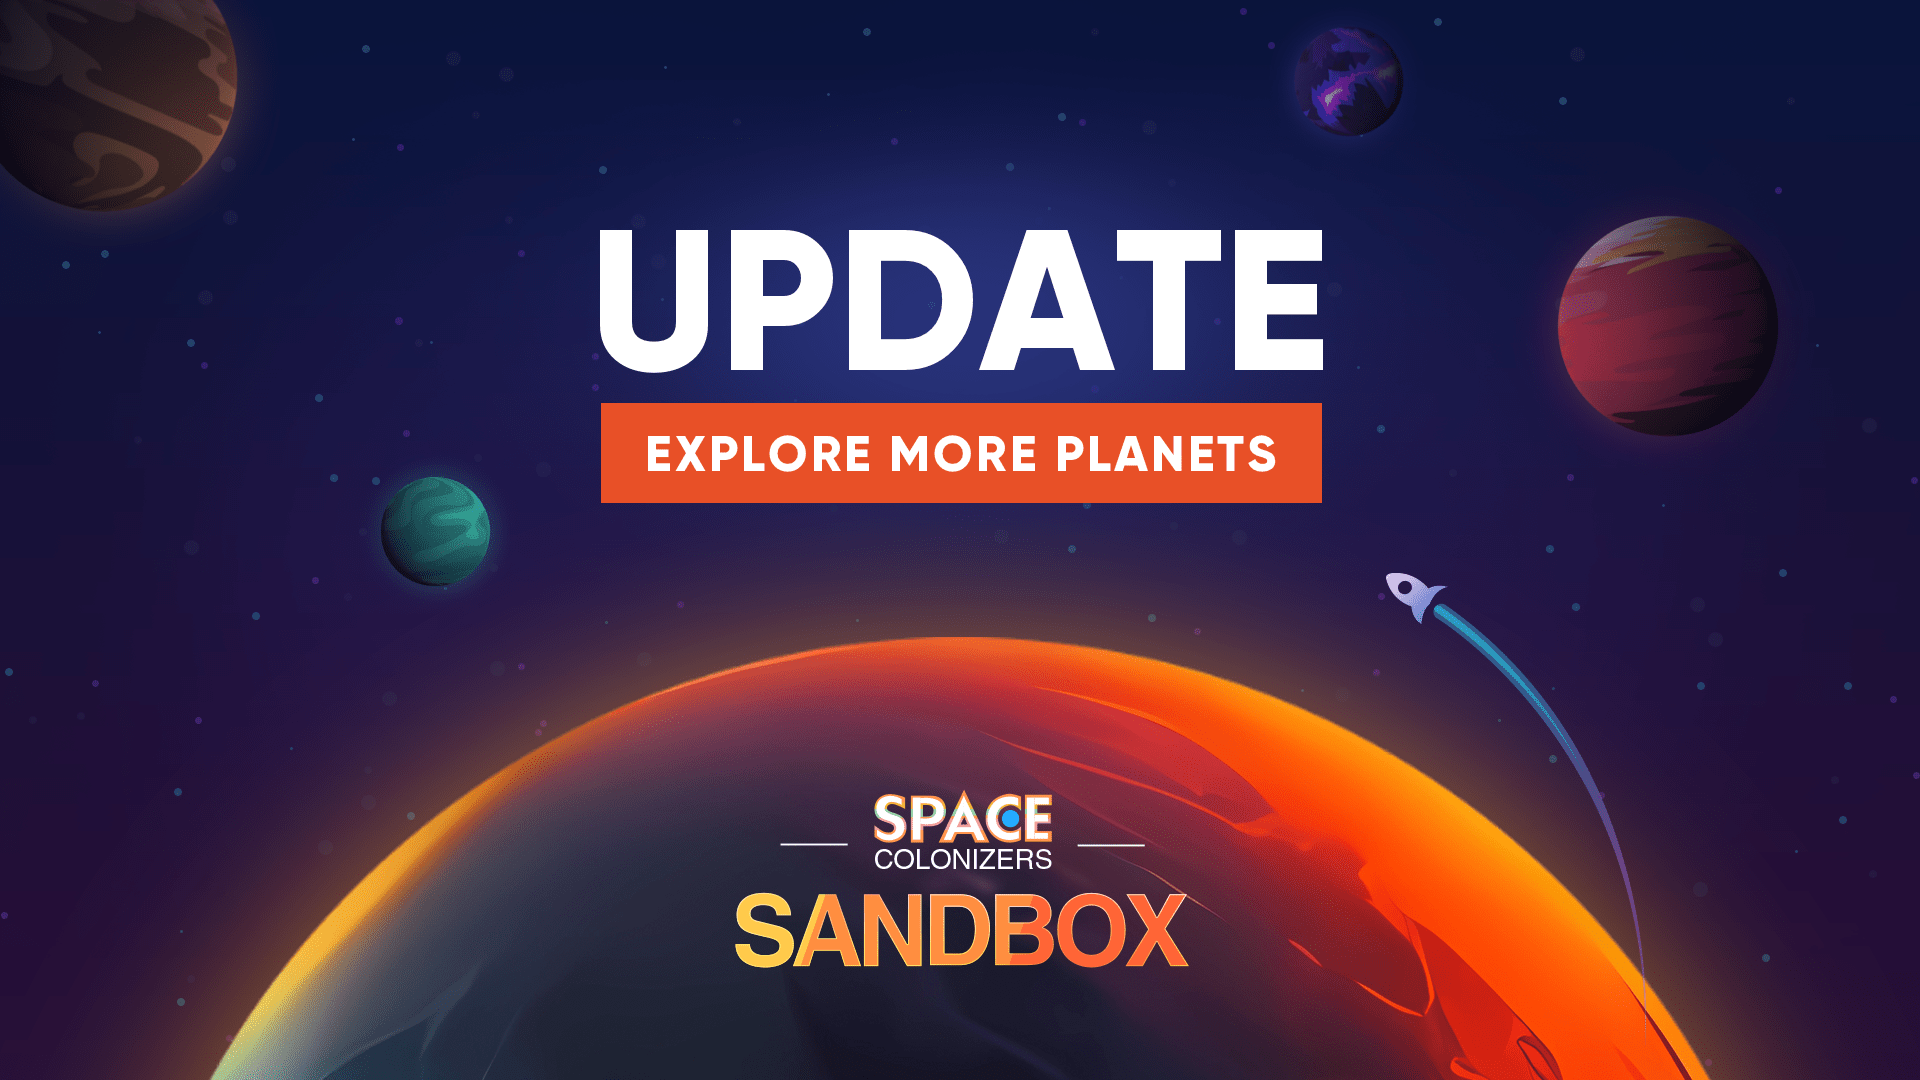 We’re rolling out to unveil the latest update for Space Colonizers – the Sandbox!